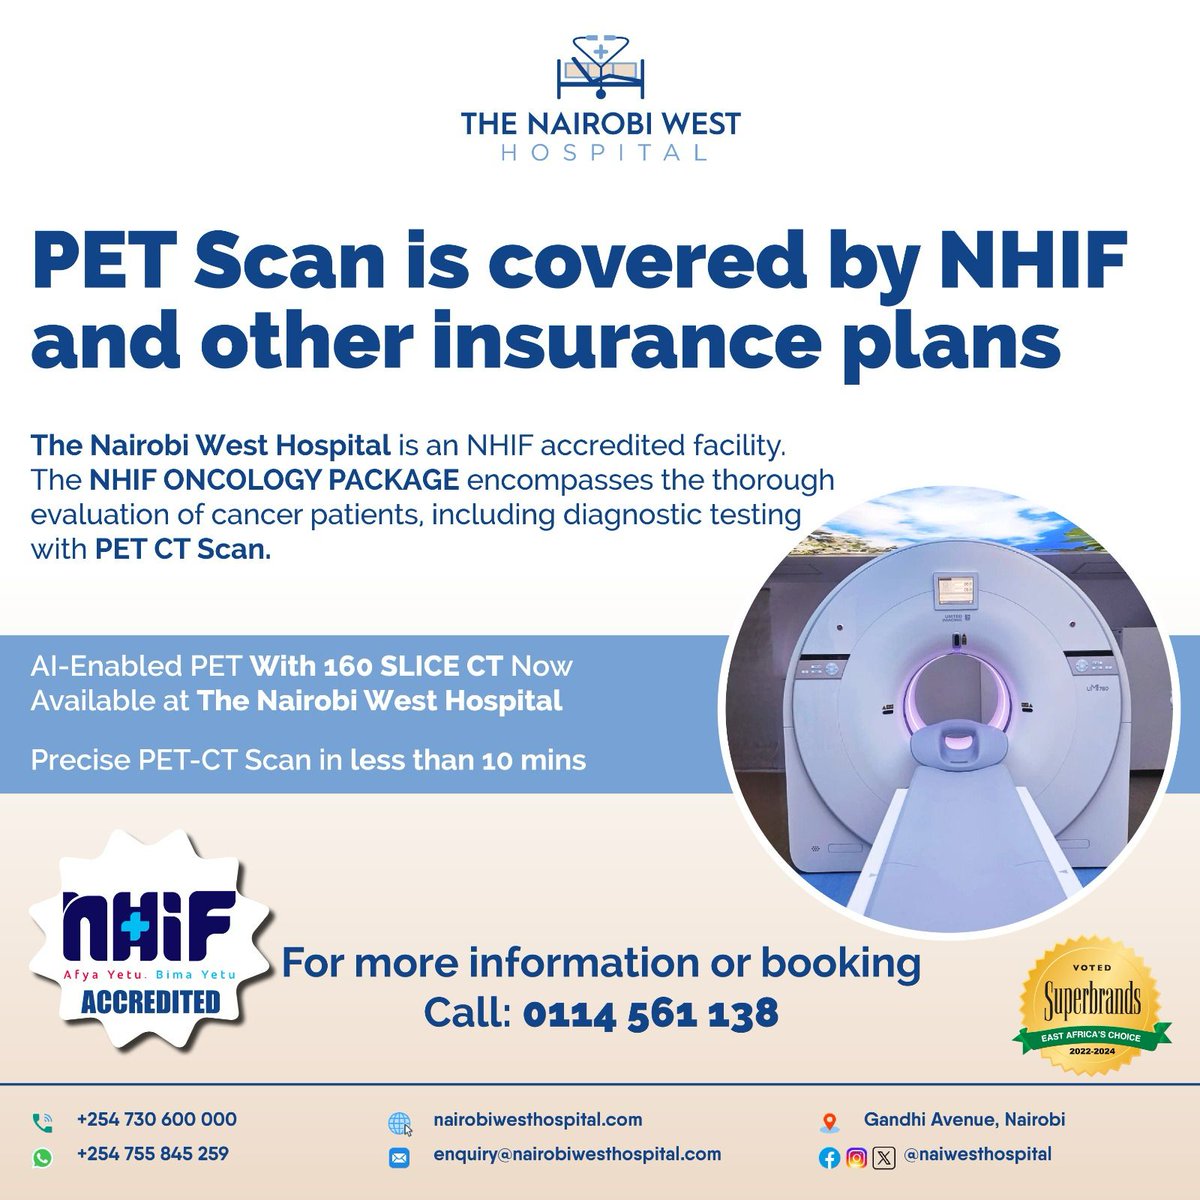 Access to PET scans is crucial for improving cancer diagnosis and management, particularly in resource-limited settings.
#NairobiWestPETScan
AI Enabled PetScan